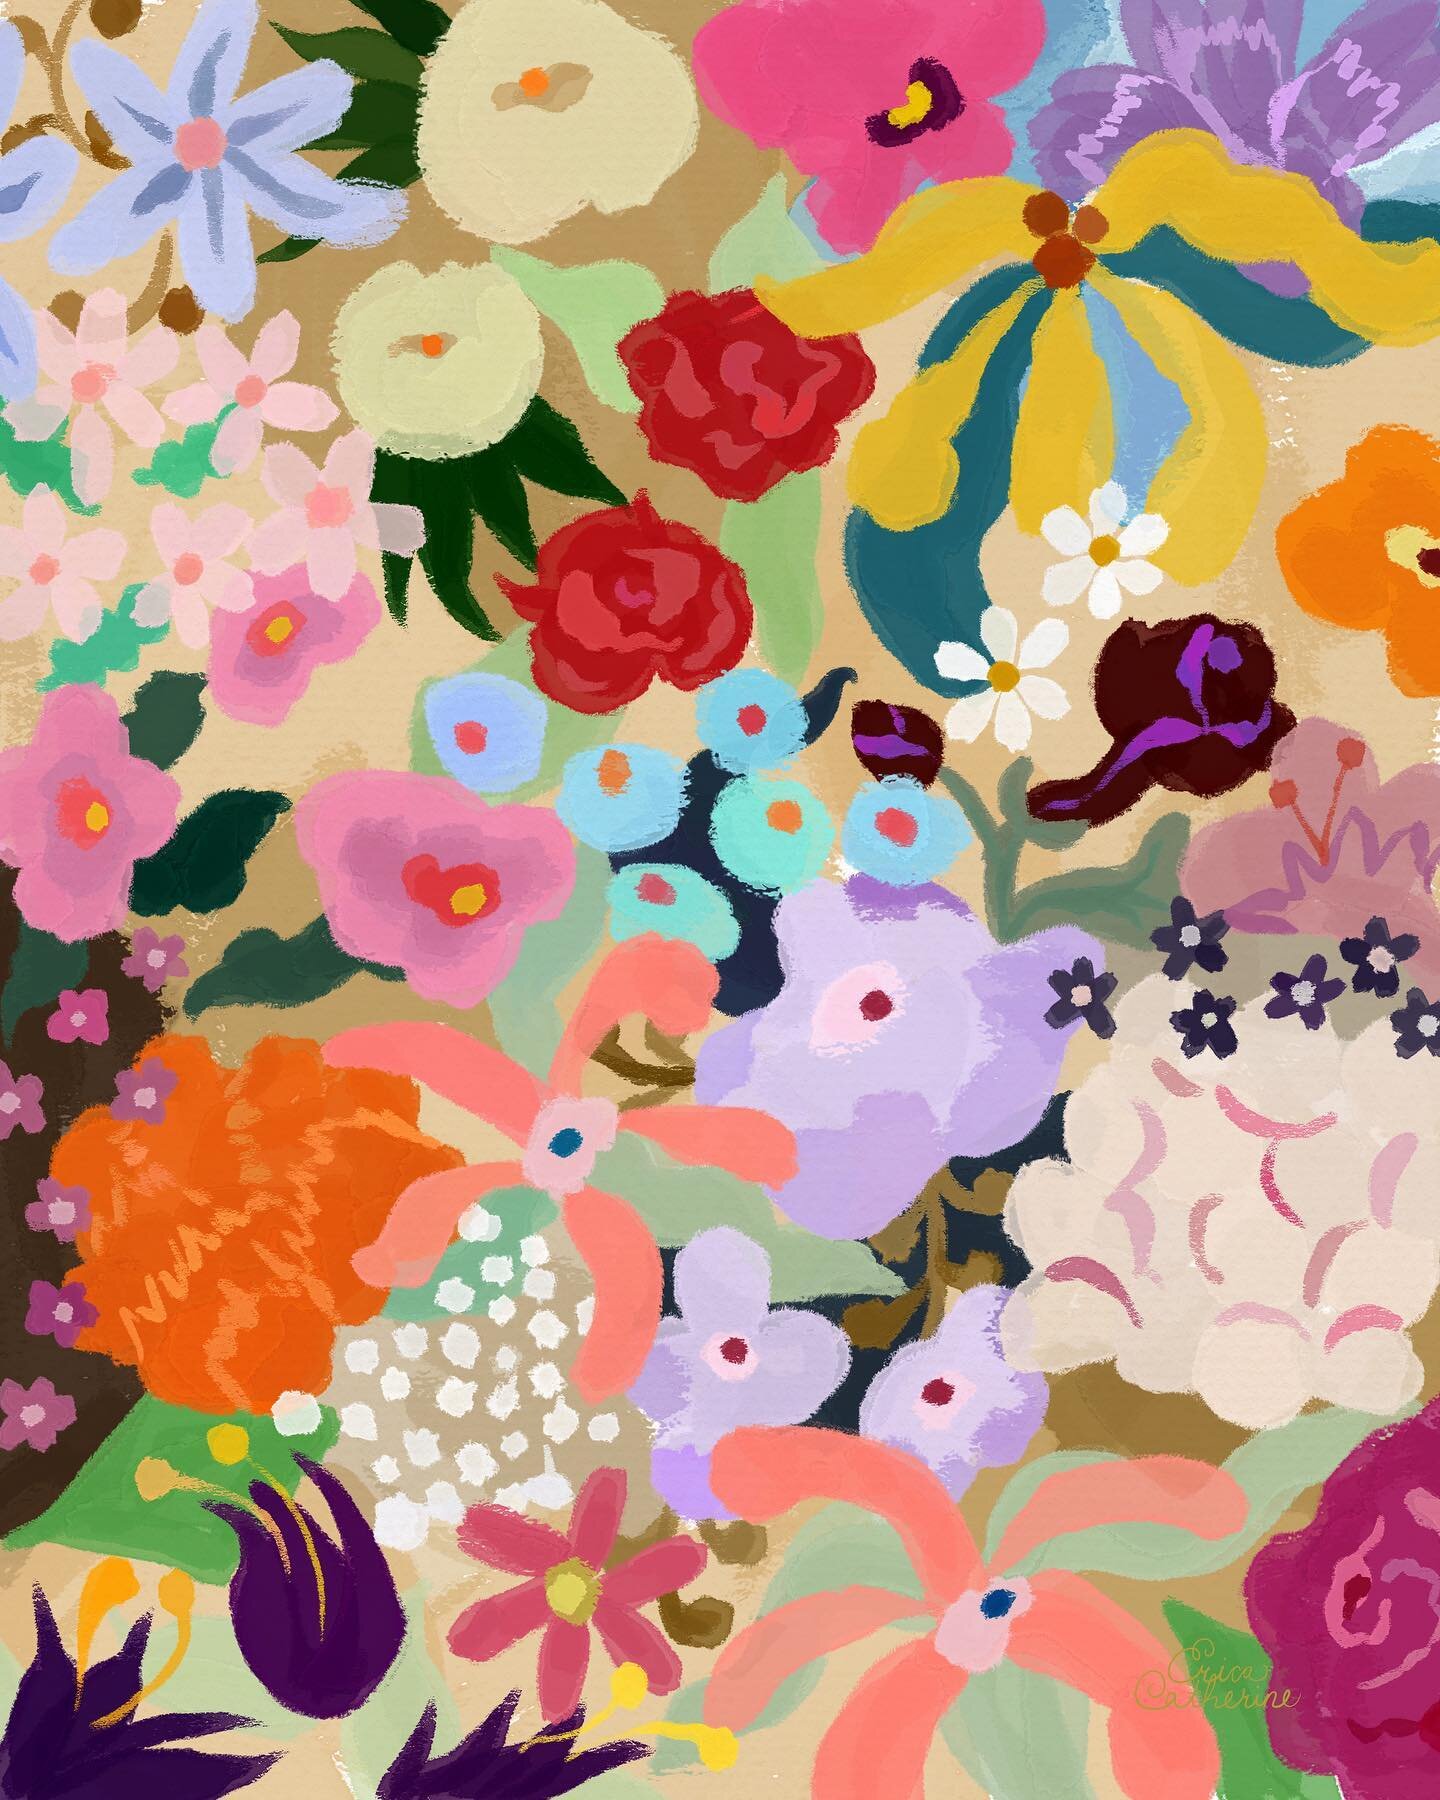 Domesticated blooms 🌼🌸🌺

Now available as an art print, via @artfullywalls

I like to call fabric florals domesticated blooms. Wildflowers tamed inside! Like pets!! I draw these particular florals on fabrics in my interiors illustrations, so I wen